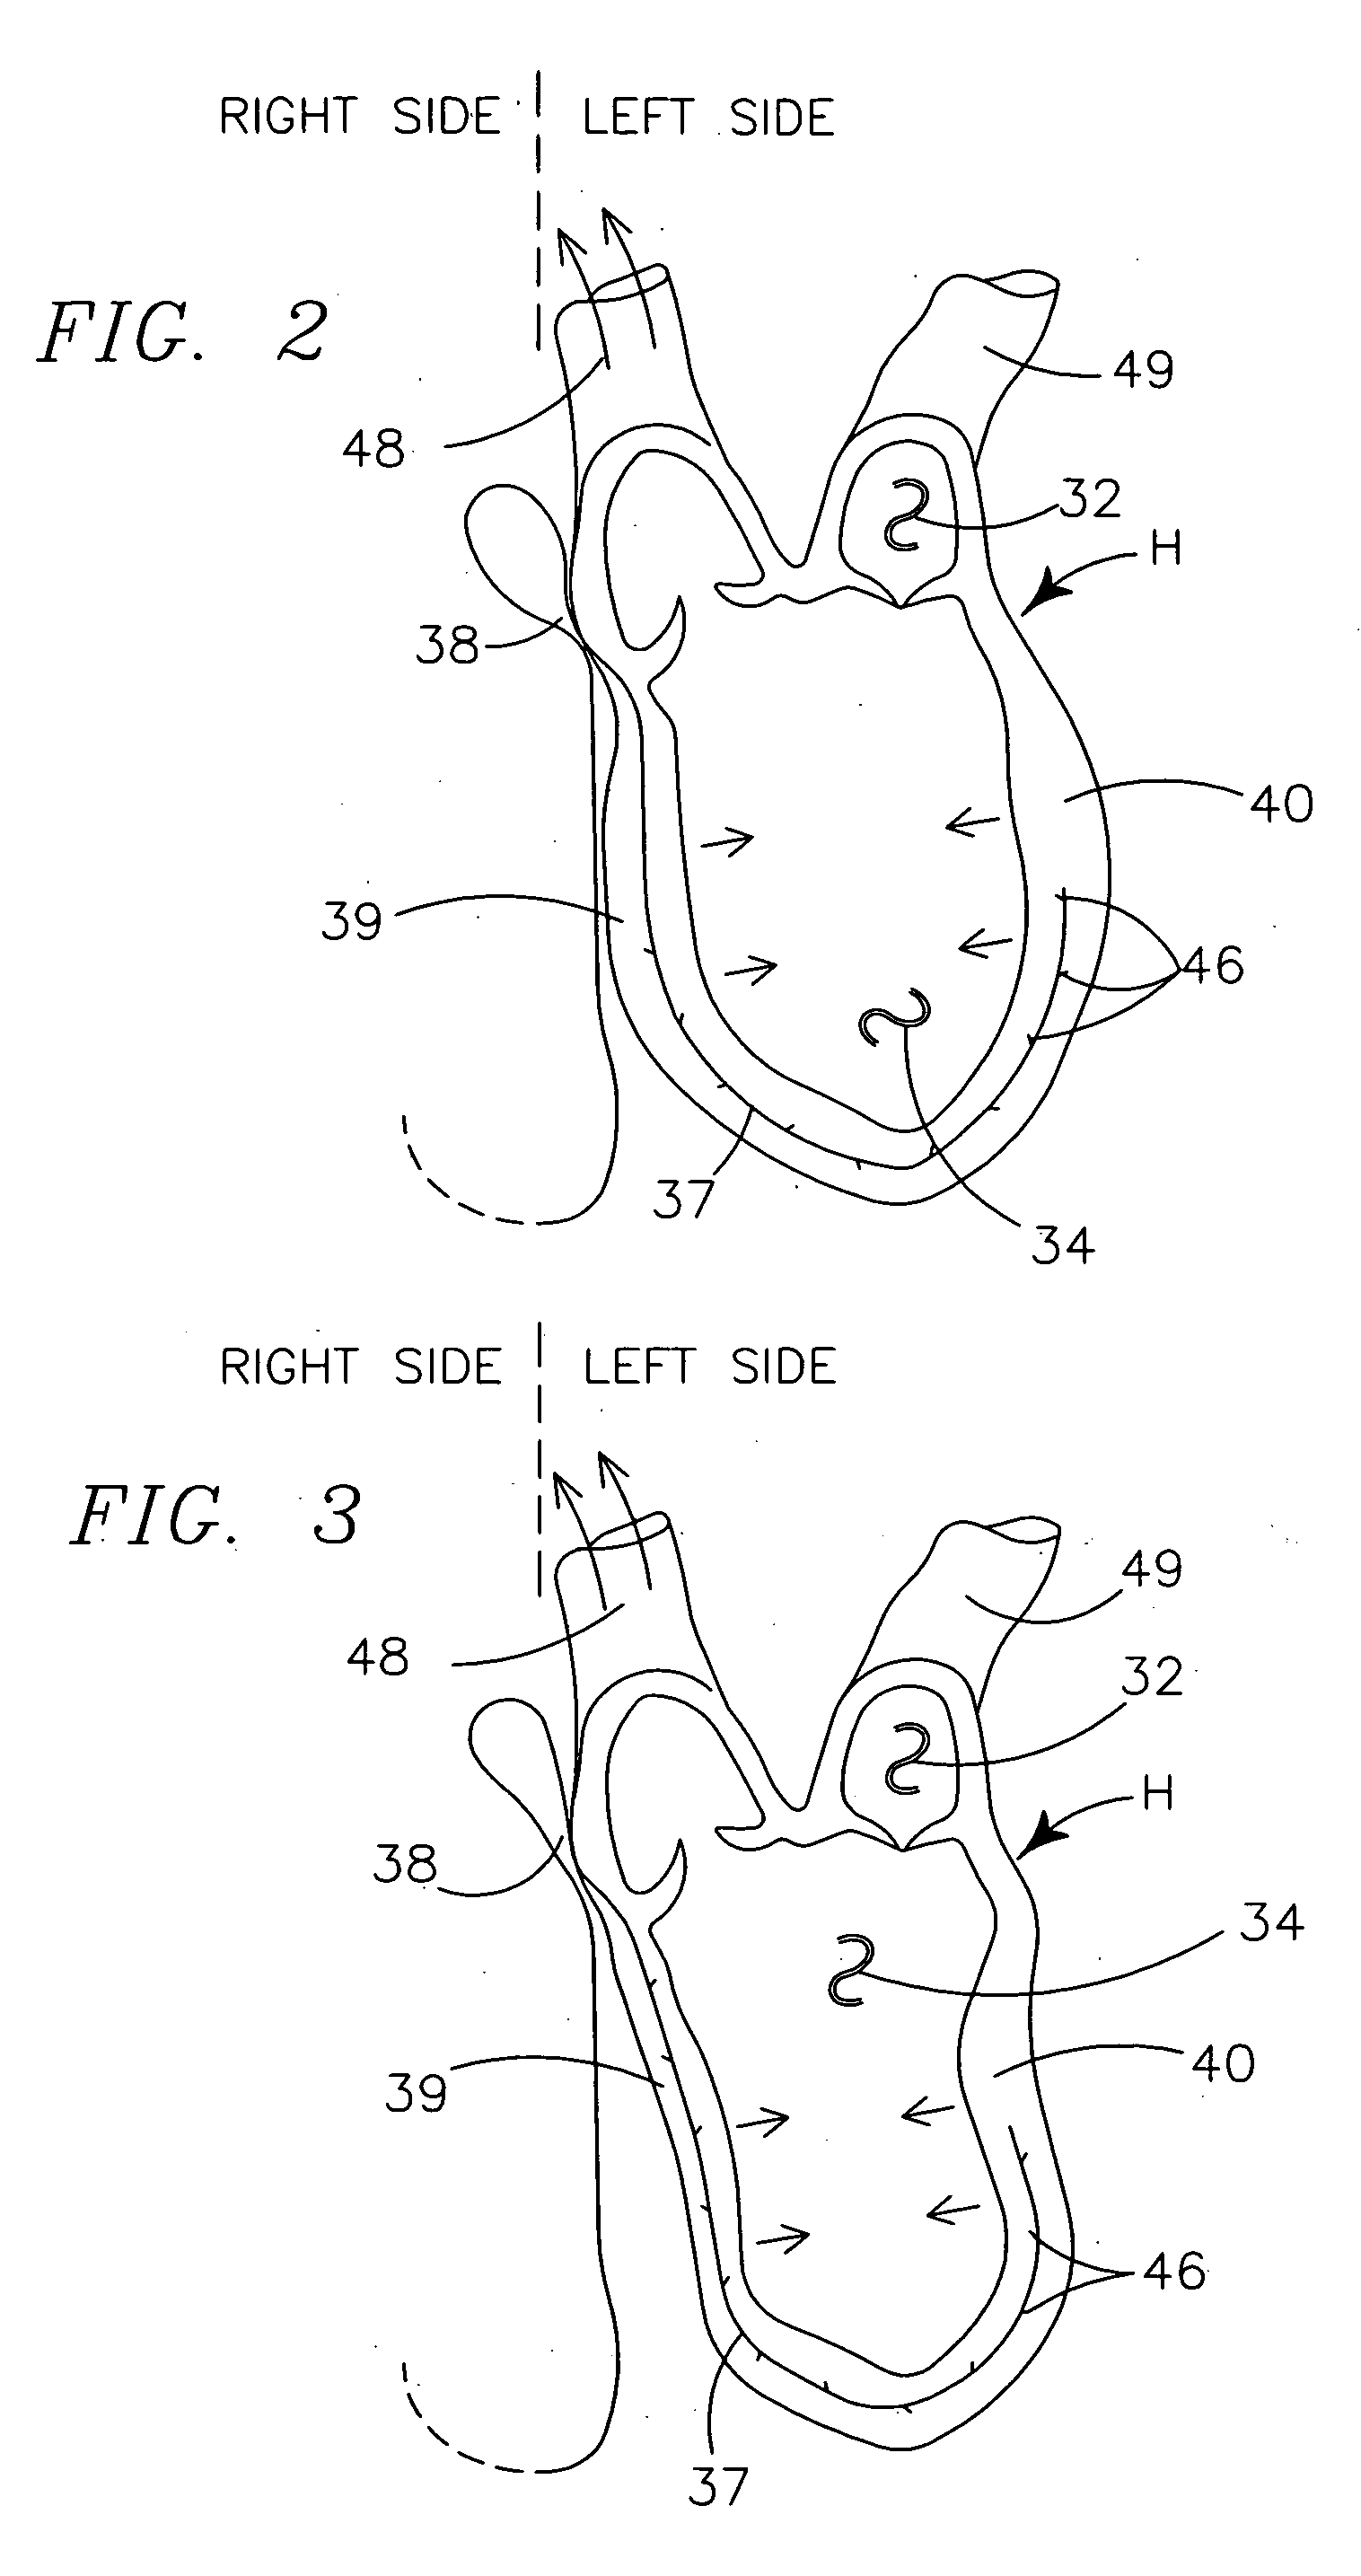 Method for optimizing CRT therapy